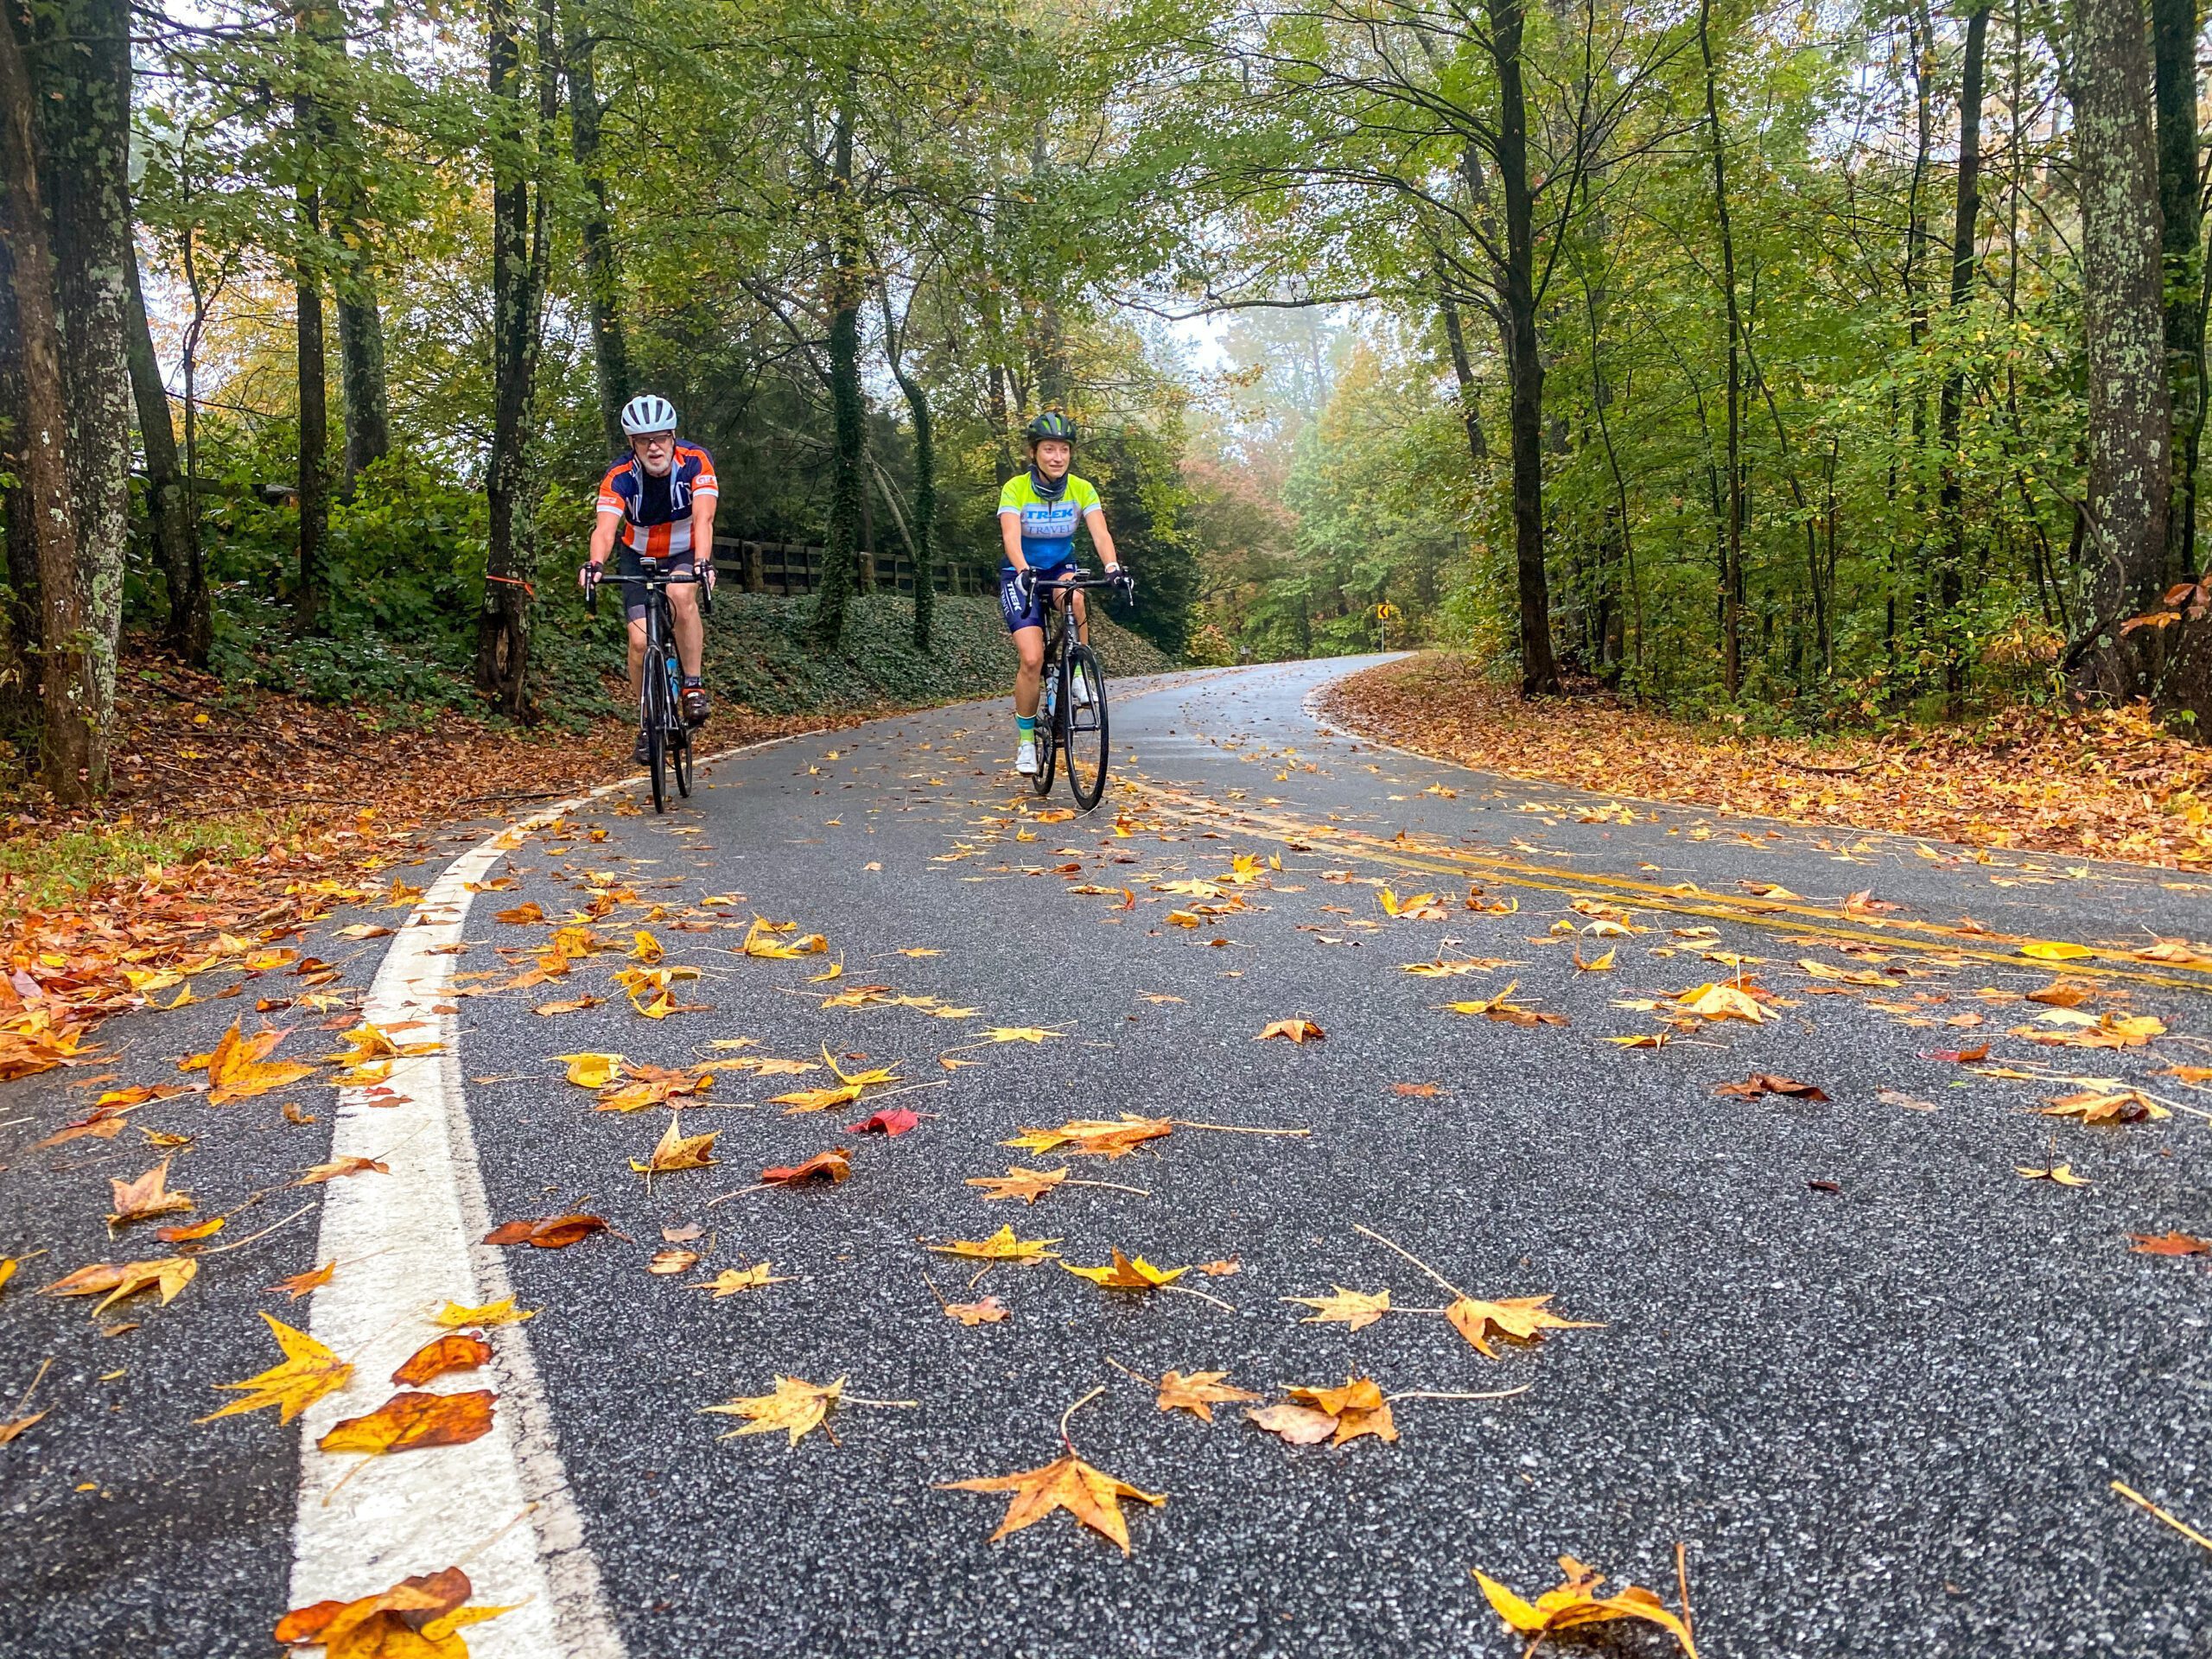 Two cyclists riding in Greenville, South Carolina in the Fall.